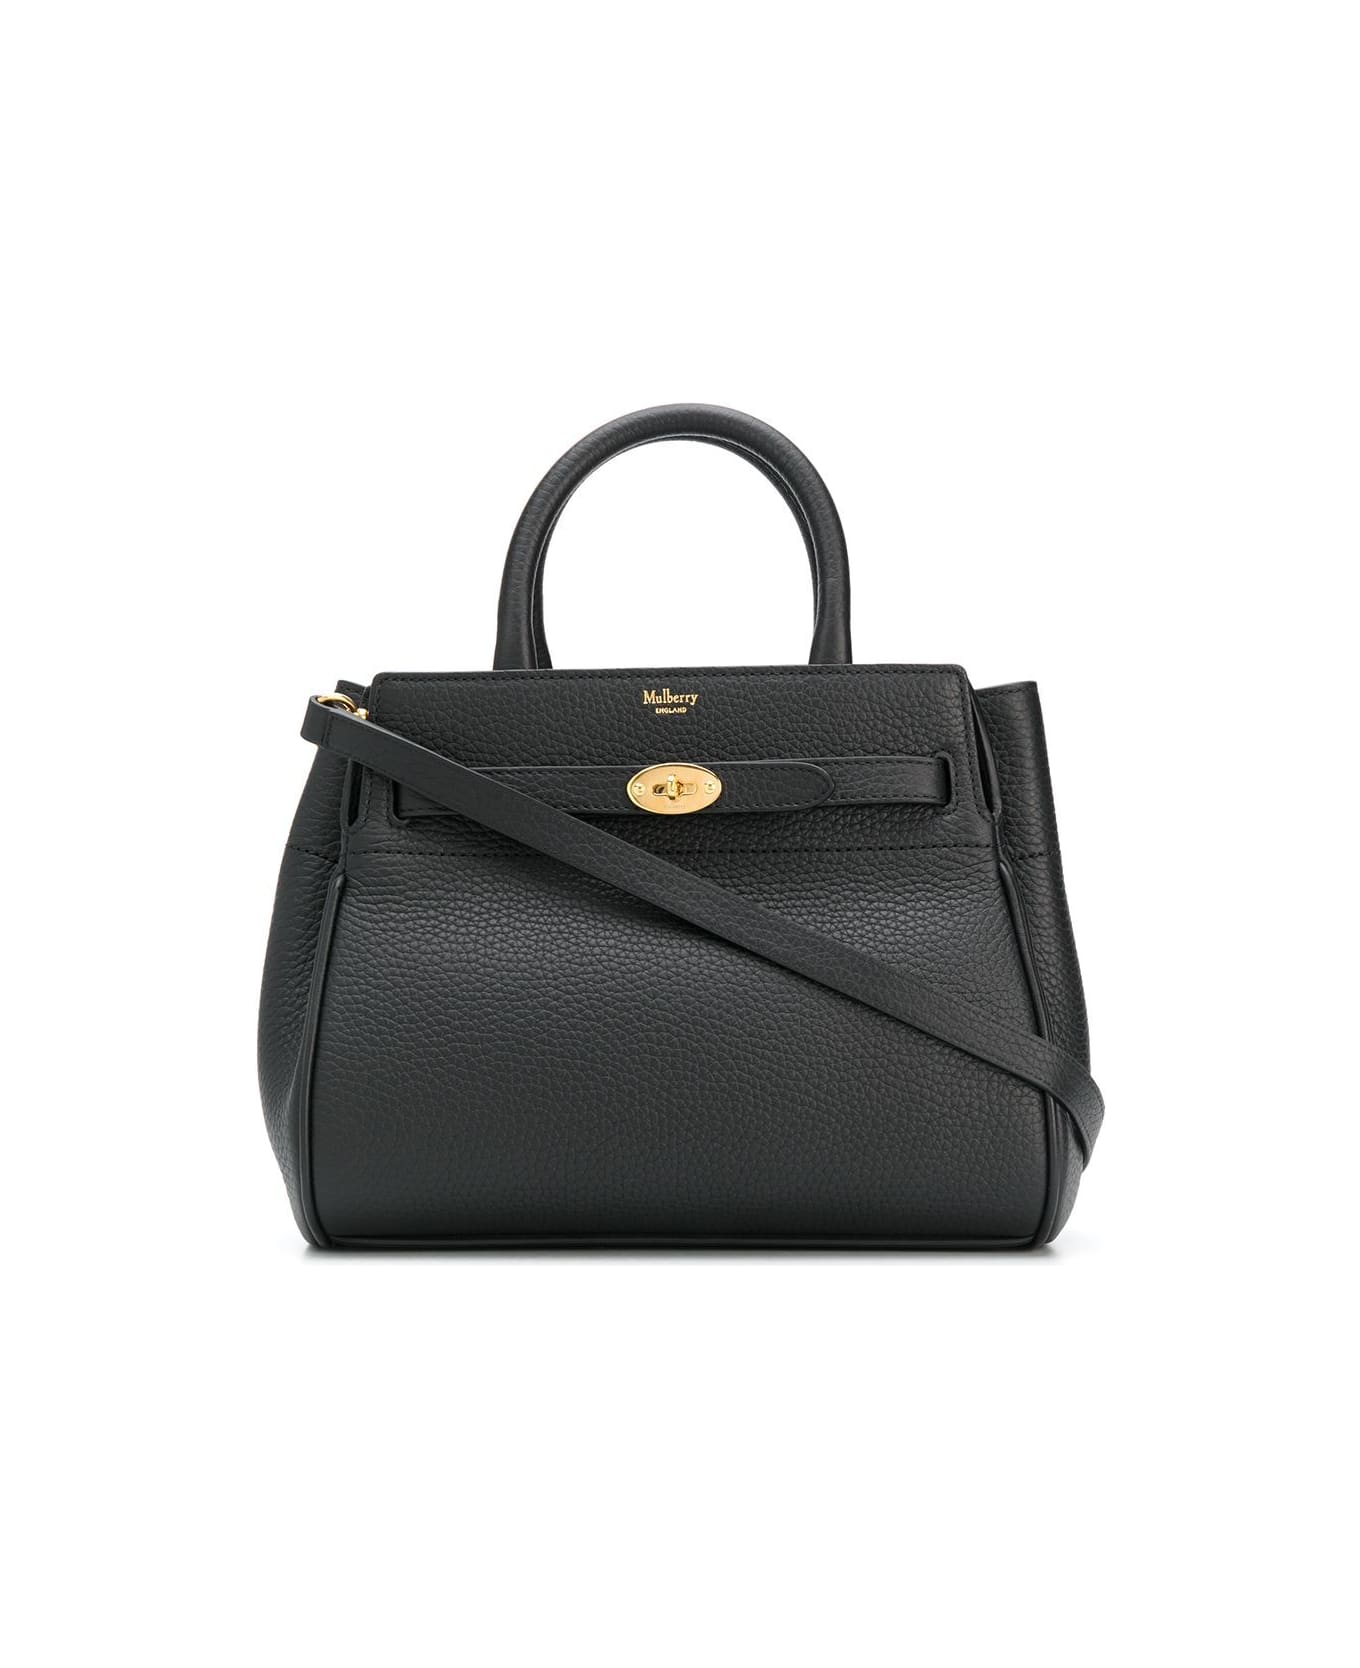 Mulberry Small Belted
Bayswater Heavy - Black